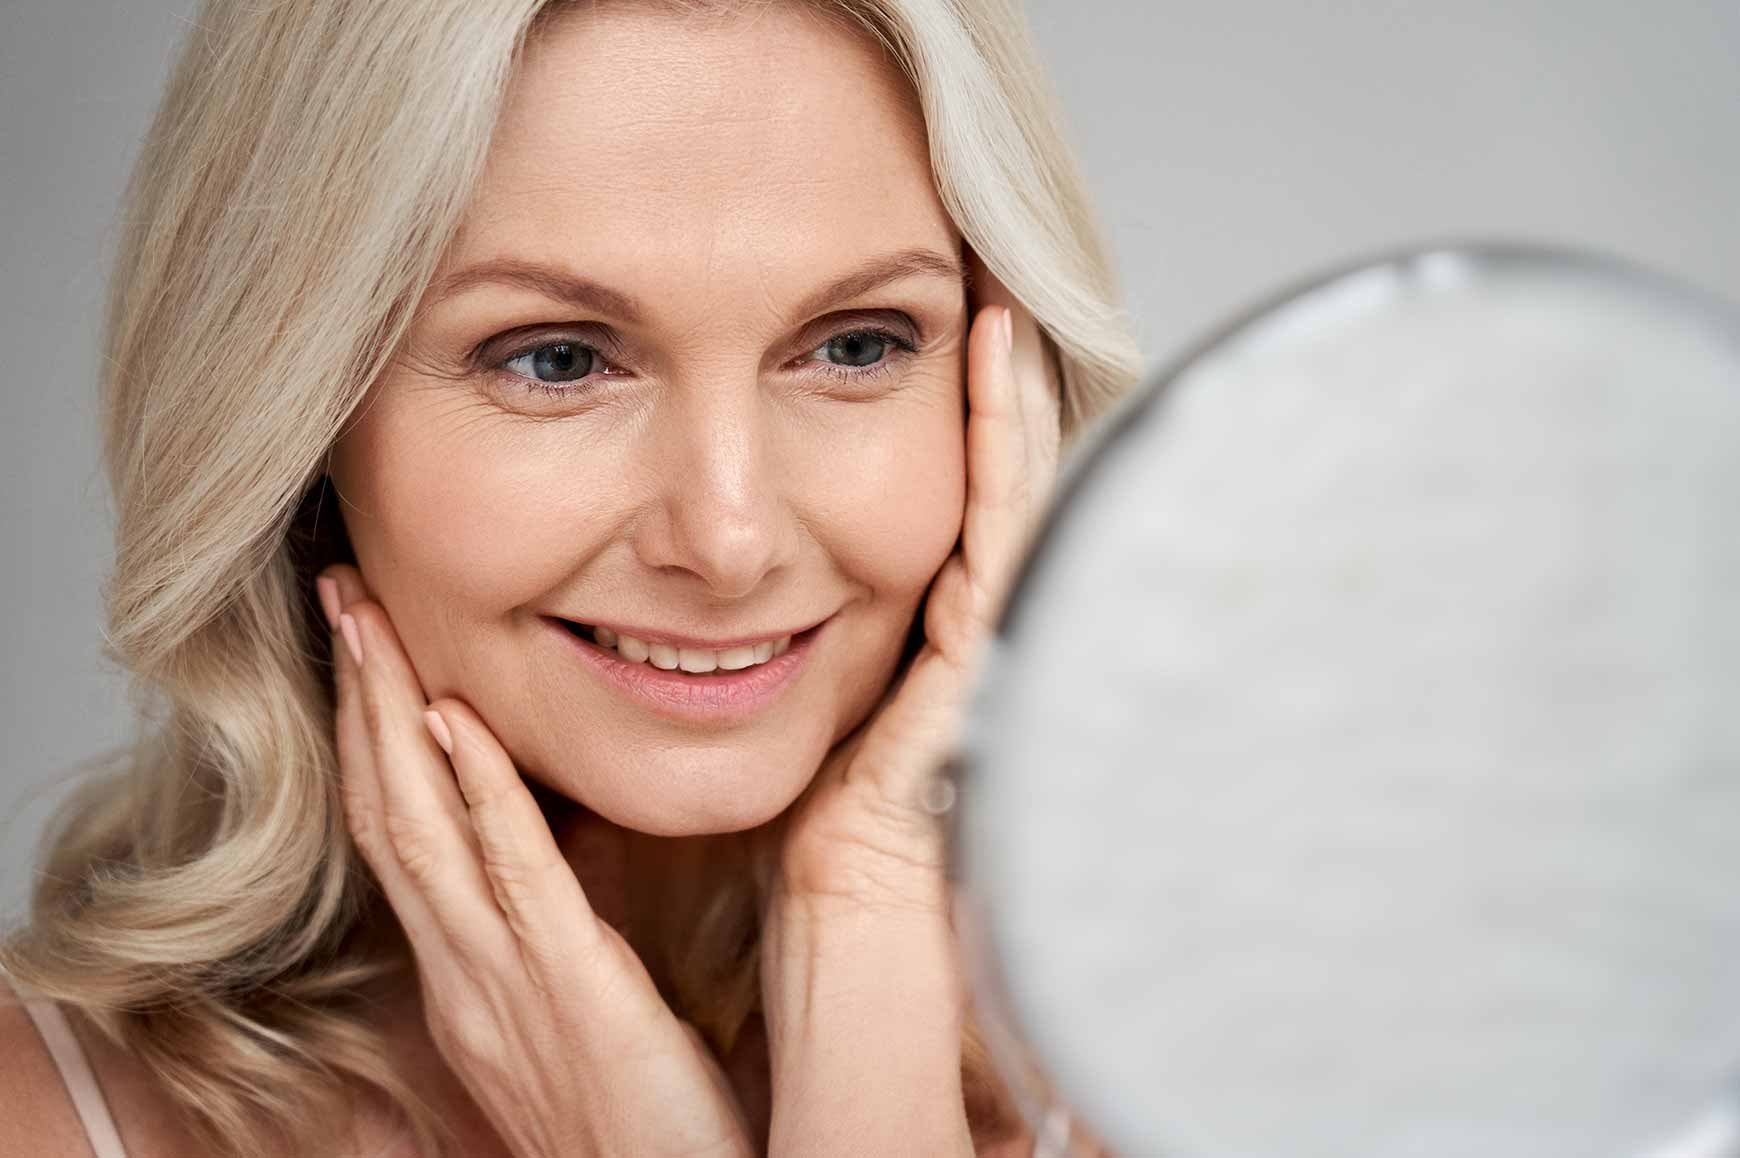 Microneedling addresses various age-related issues of the skin. Contact Dr. Melissa Marks to find out more.